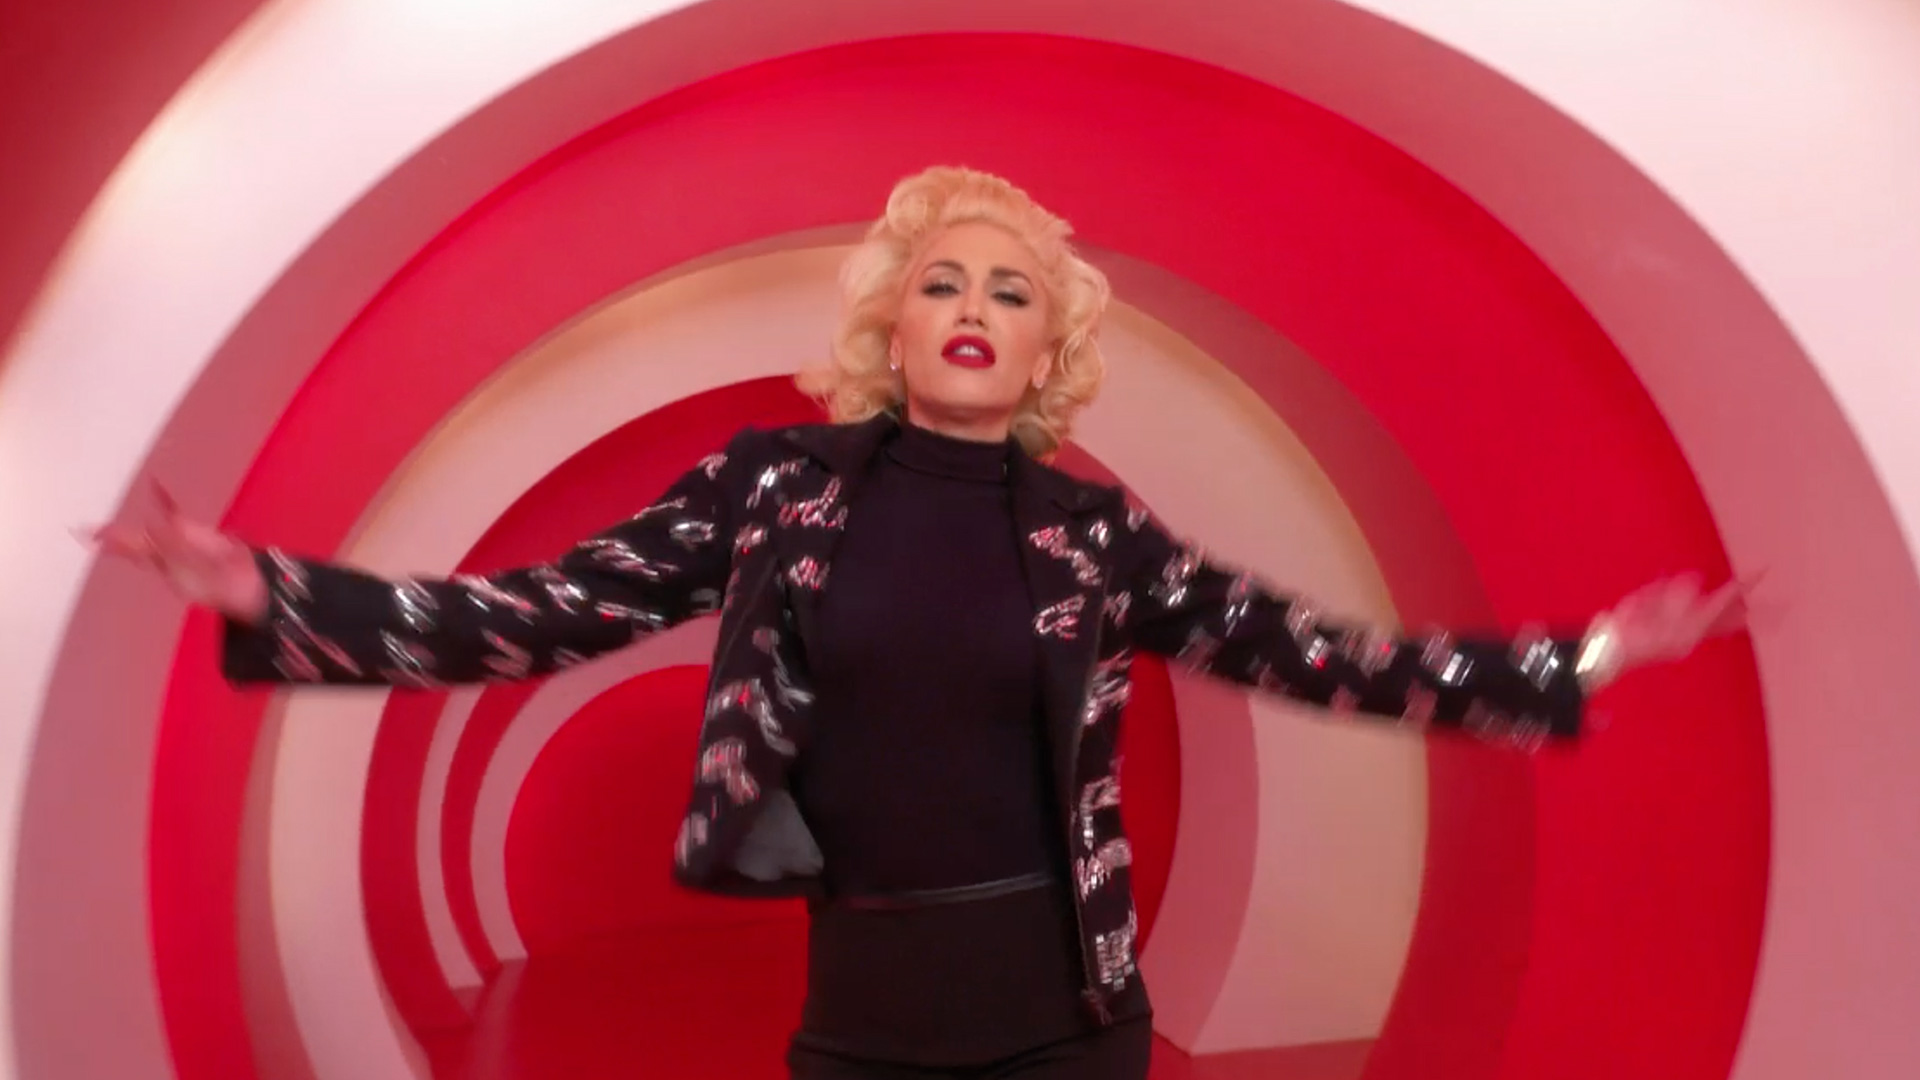 Target Creates First Ever Live Music Video with Gwen Stefani 